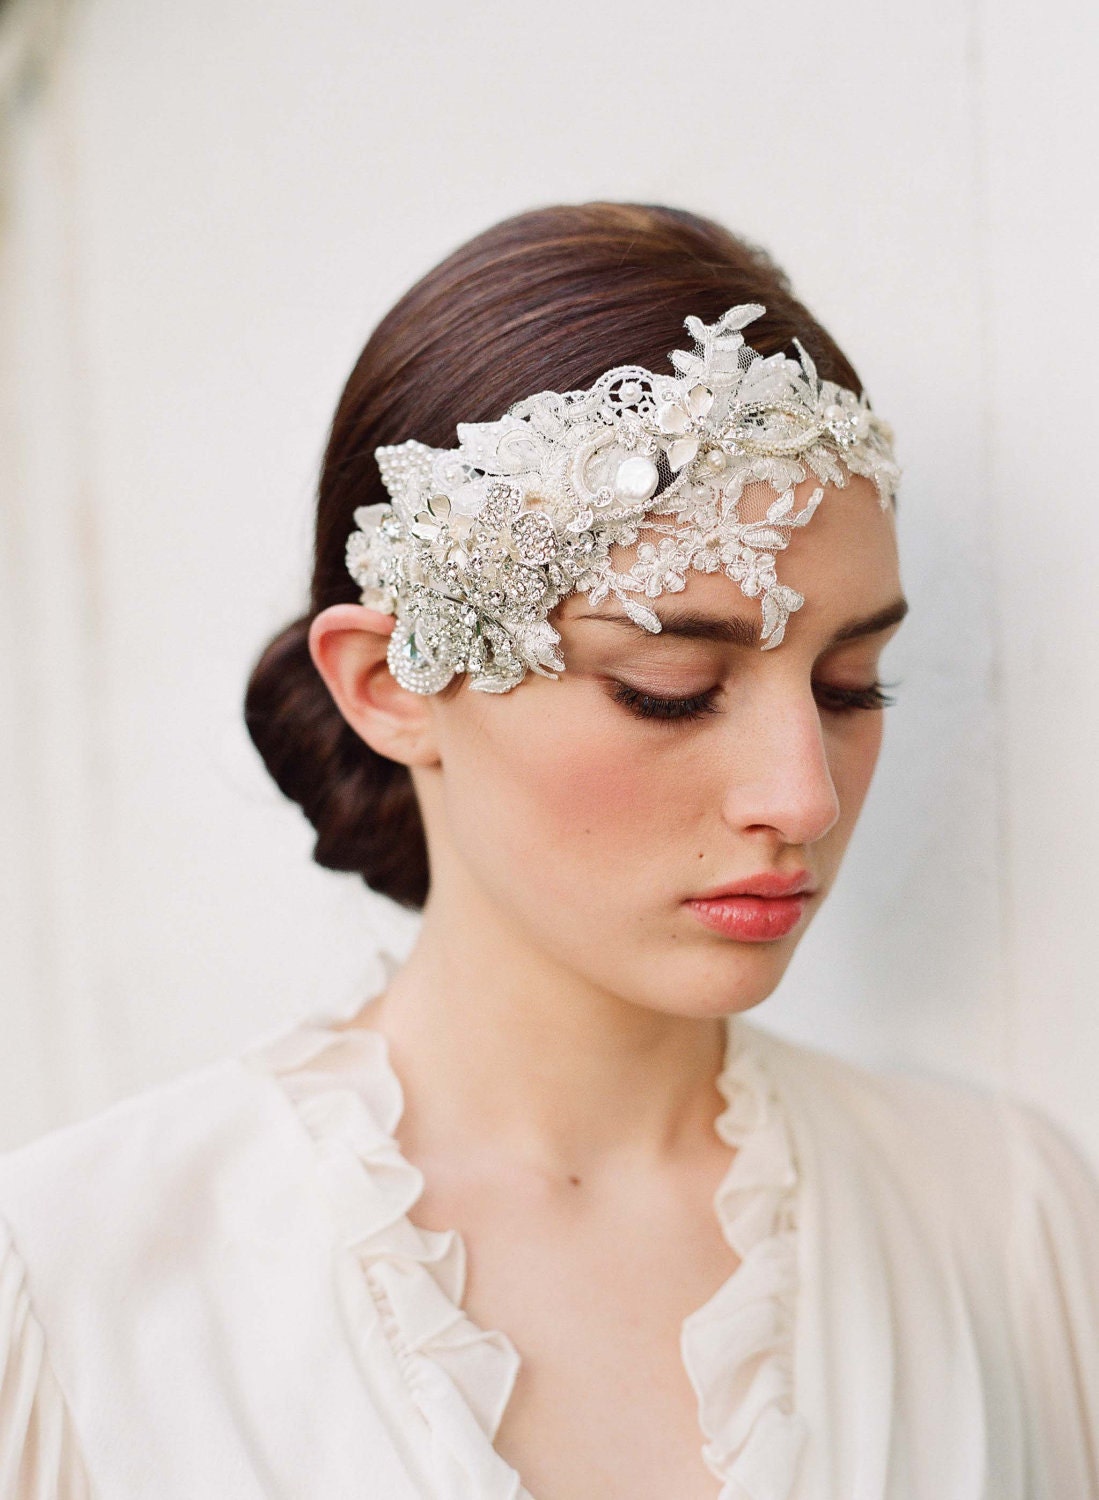 Floral bridal headpiece, rhinestones, lace headband - Embellished lace and rhinestone headpiece - Style 252 - Made to Order